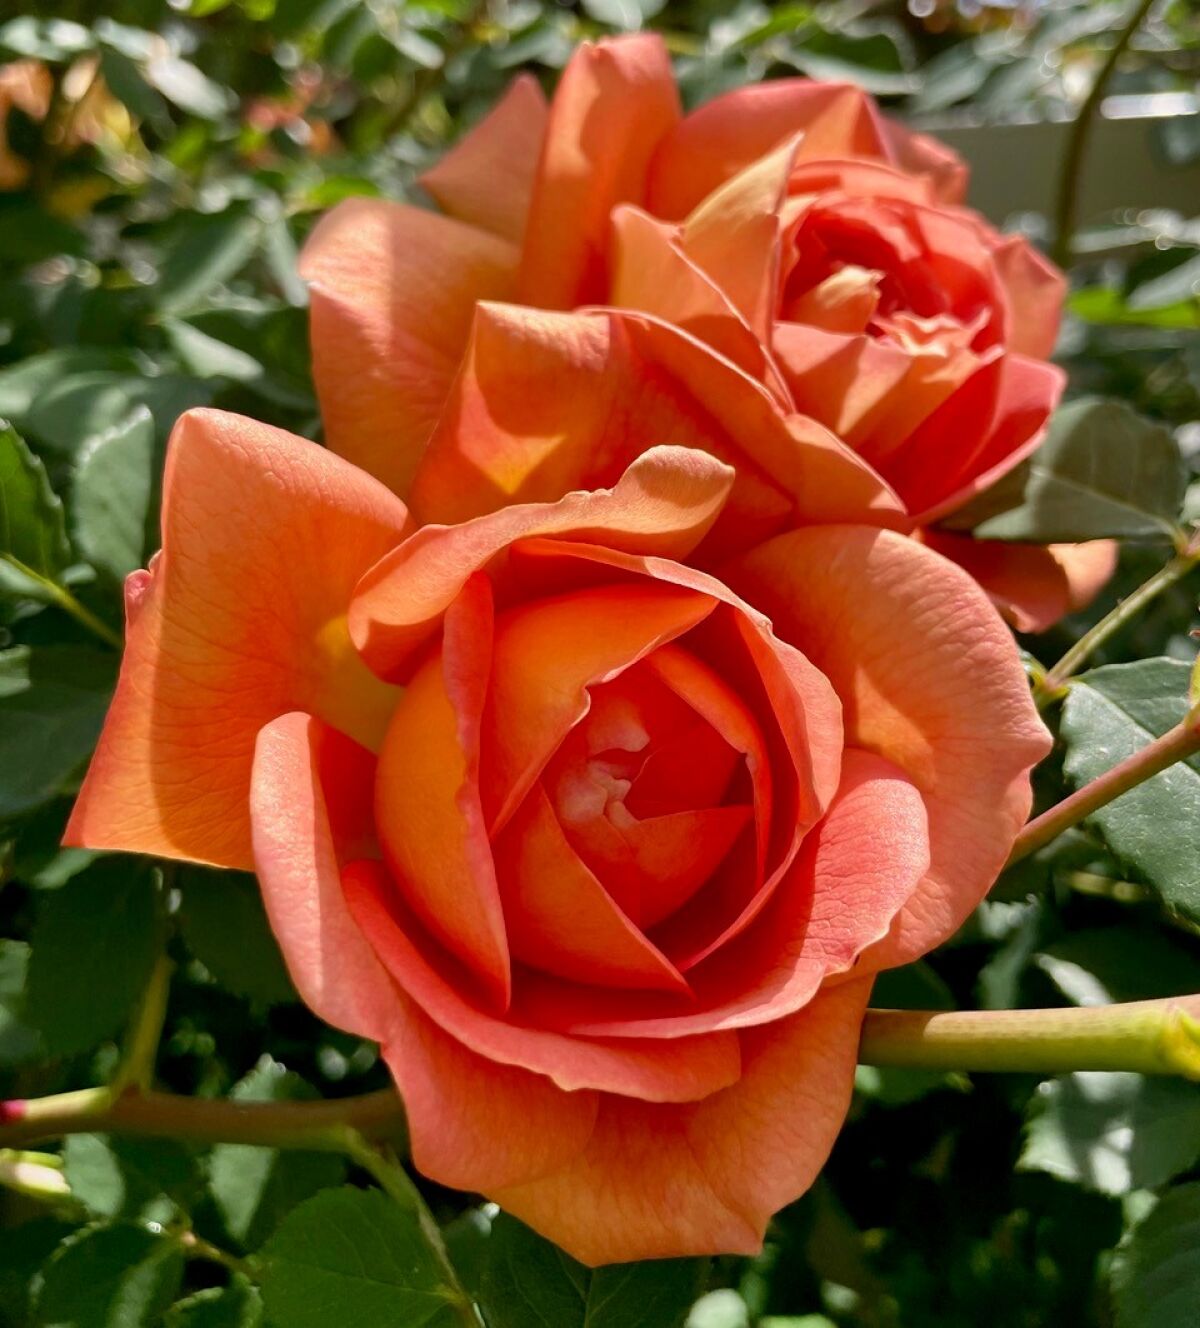 A close-up view of the bloom of a Lady of Shalott rose.